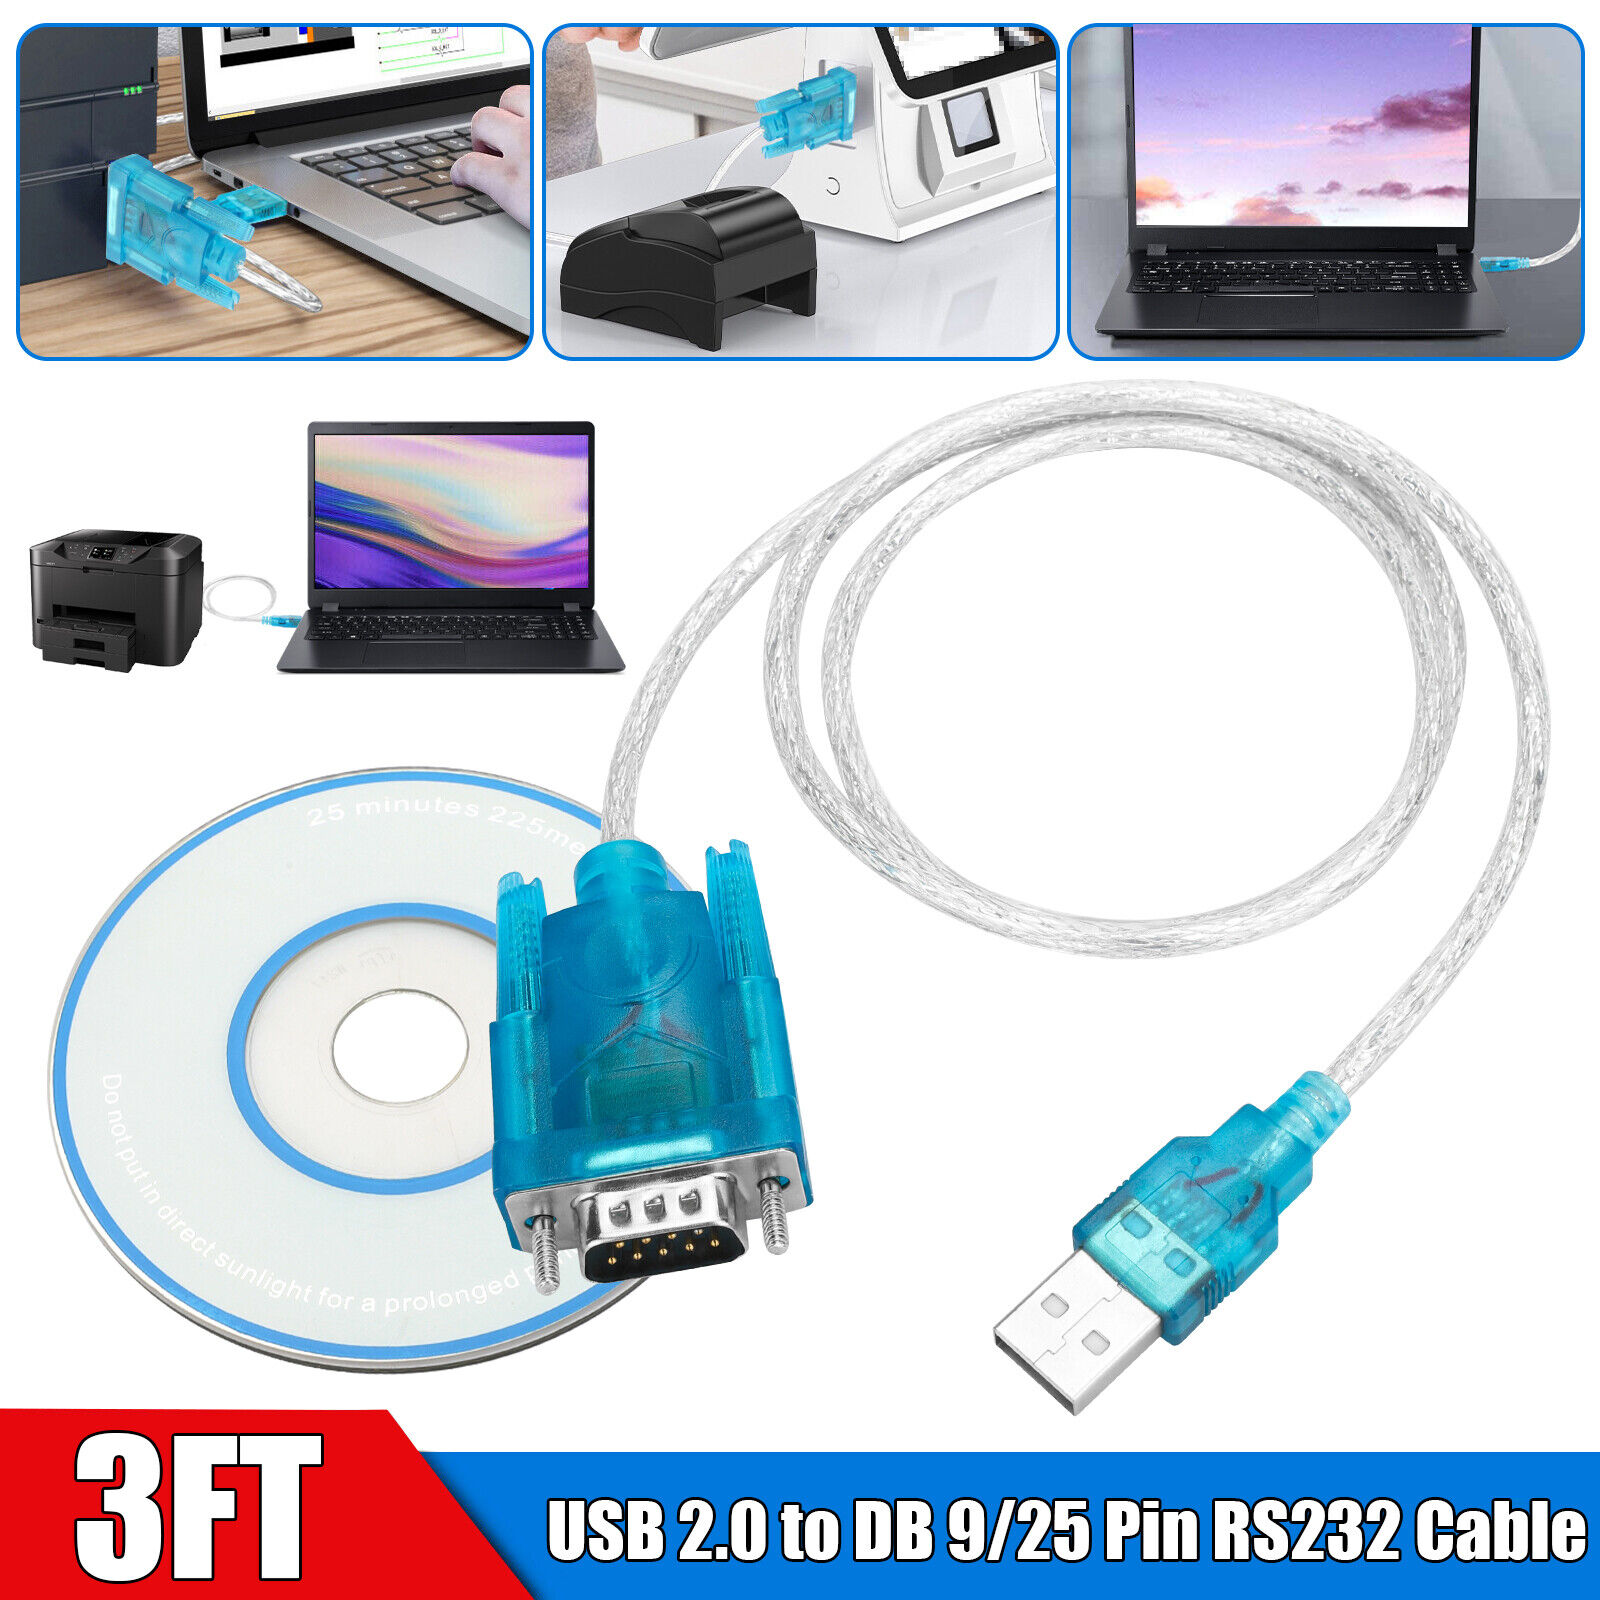 USB 2.0 to Serial DB 9 Pin RS232 Cable + 25 Parallel Adapter Win7/ 8/ 10 & Mac